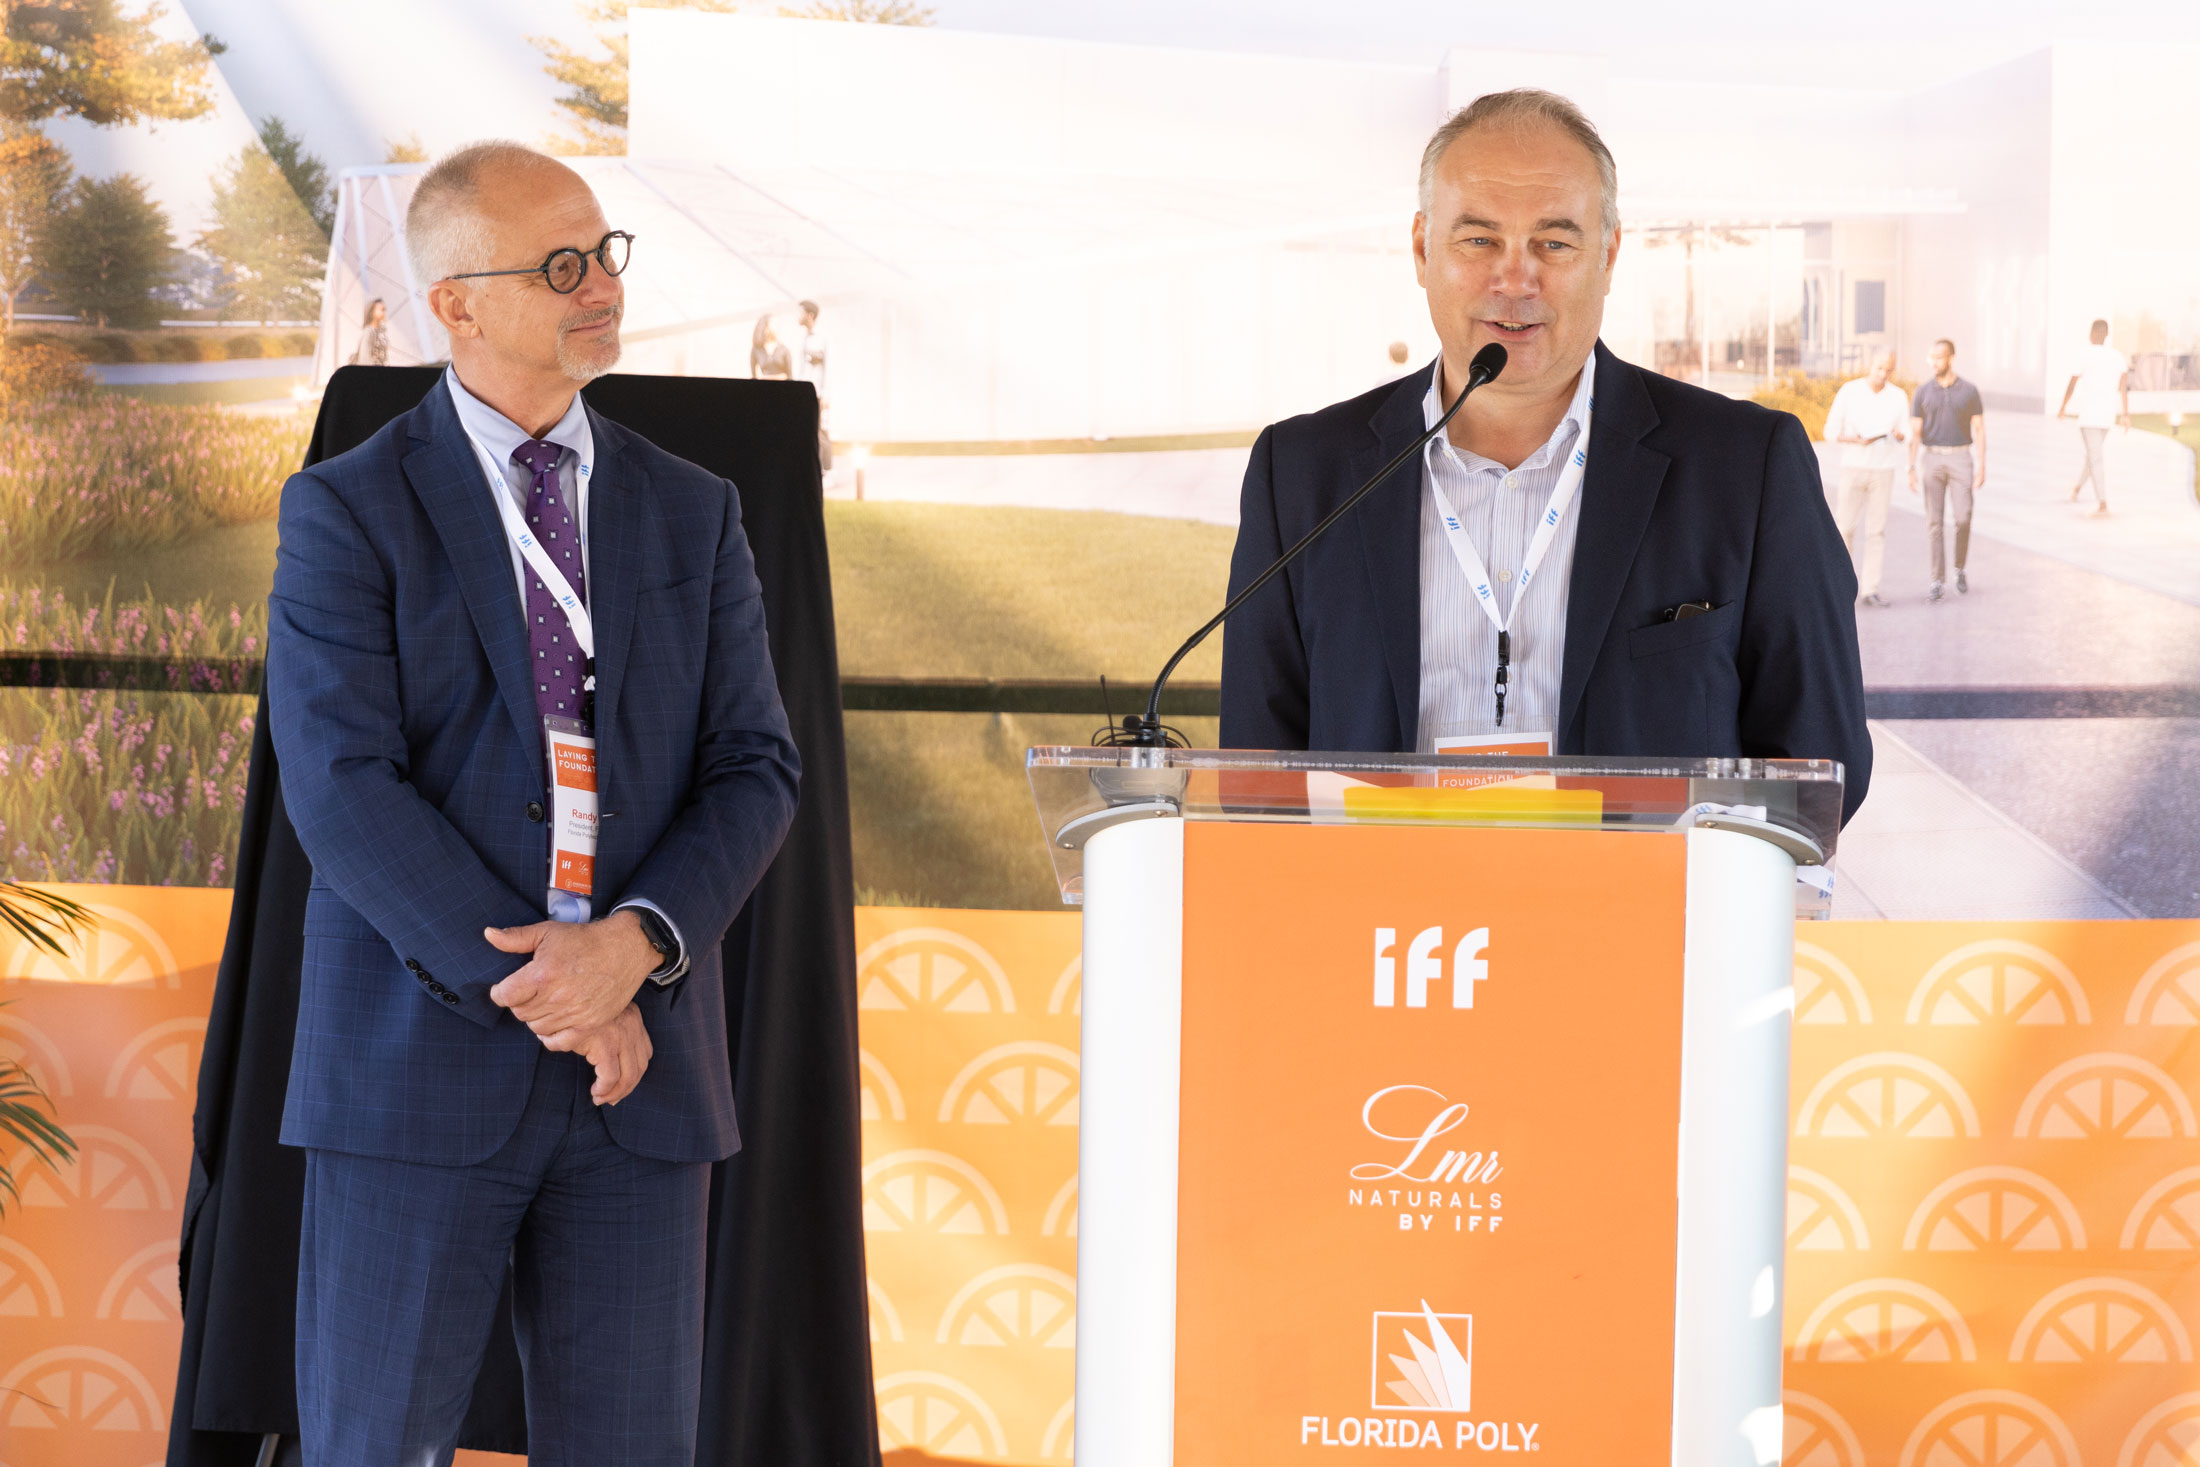 IFF launches Florida Poly partnership with $125K scholarship and research fund